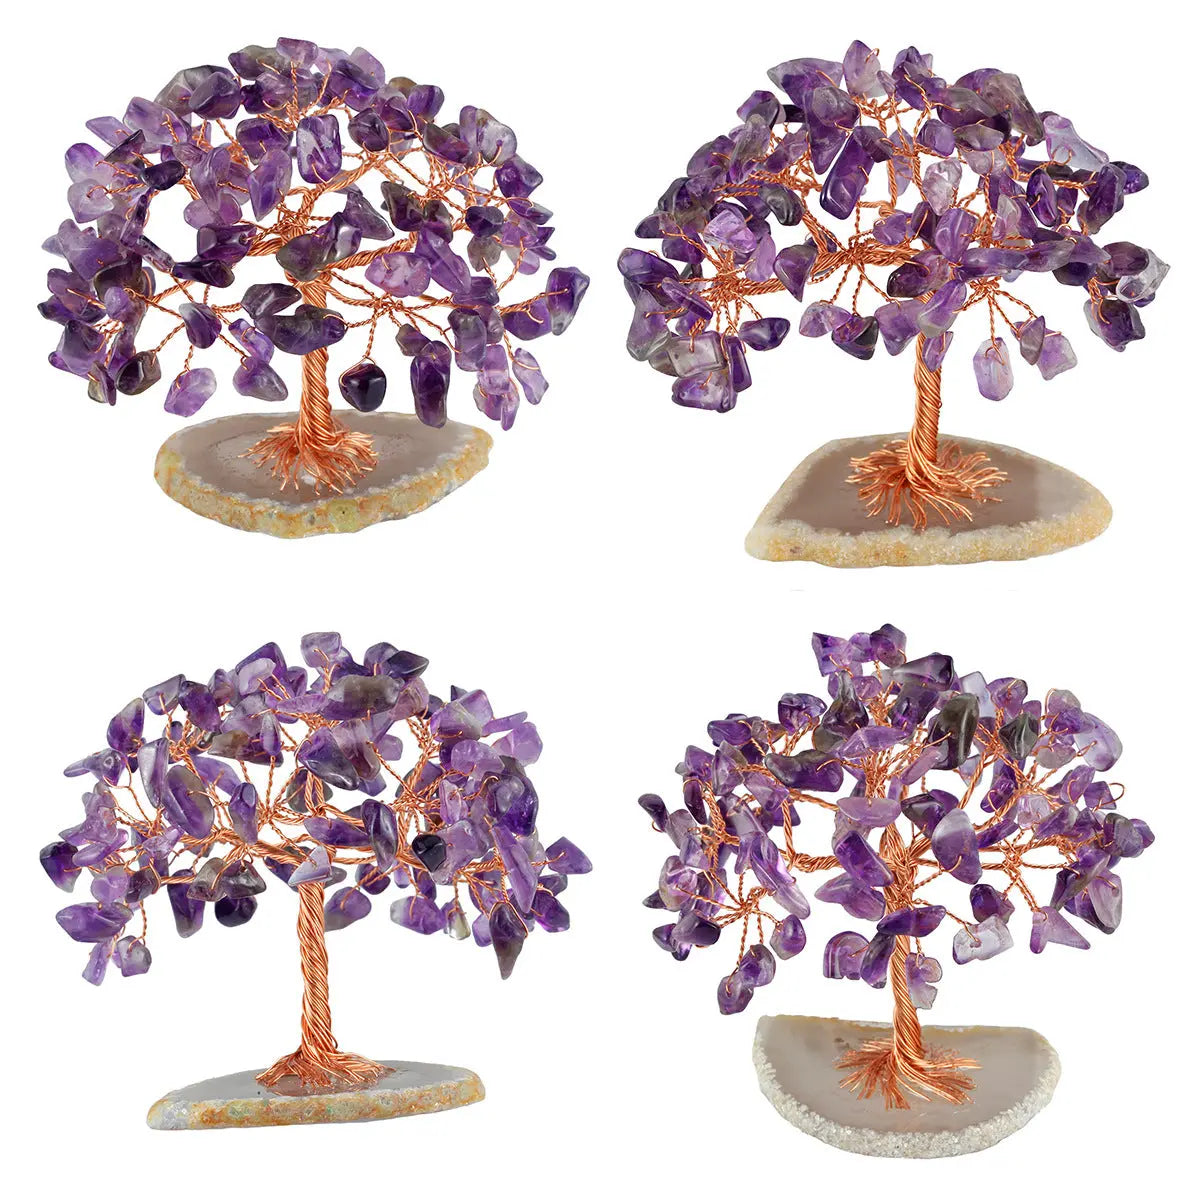 Spreading Tree Of Life, Agate Slices Base, Amethyst Crystal Tree, Feng Shui Lucky Money Gemstone Tree Healing Crystal Home